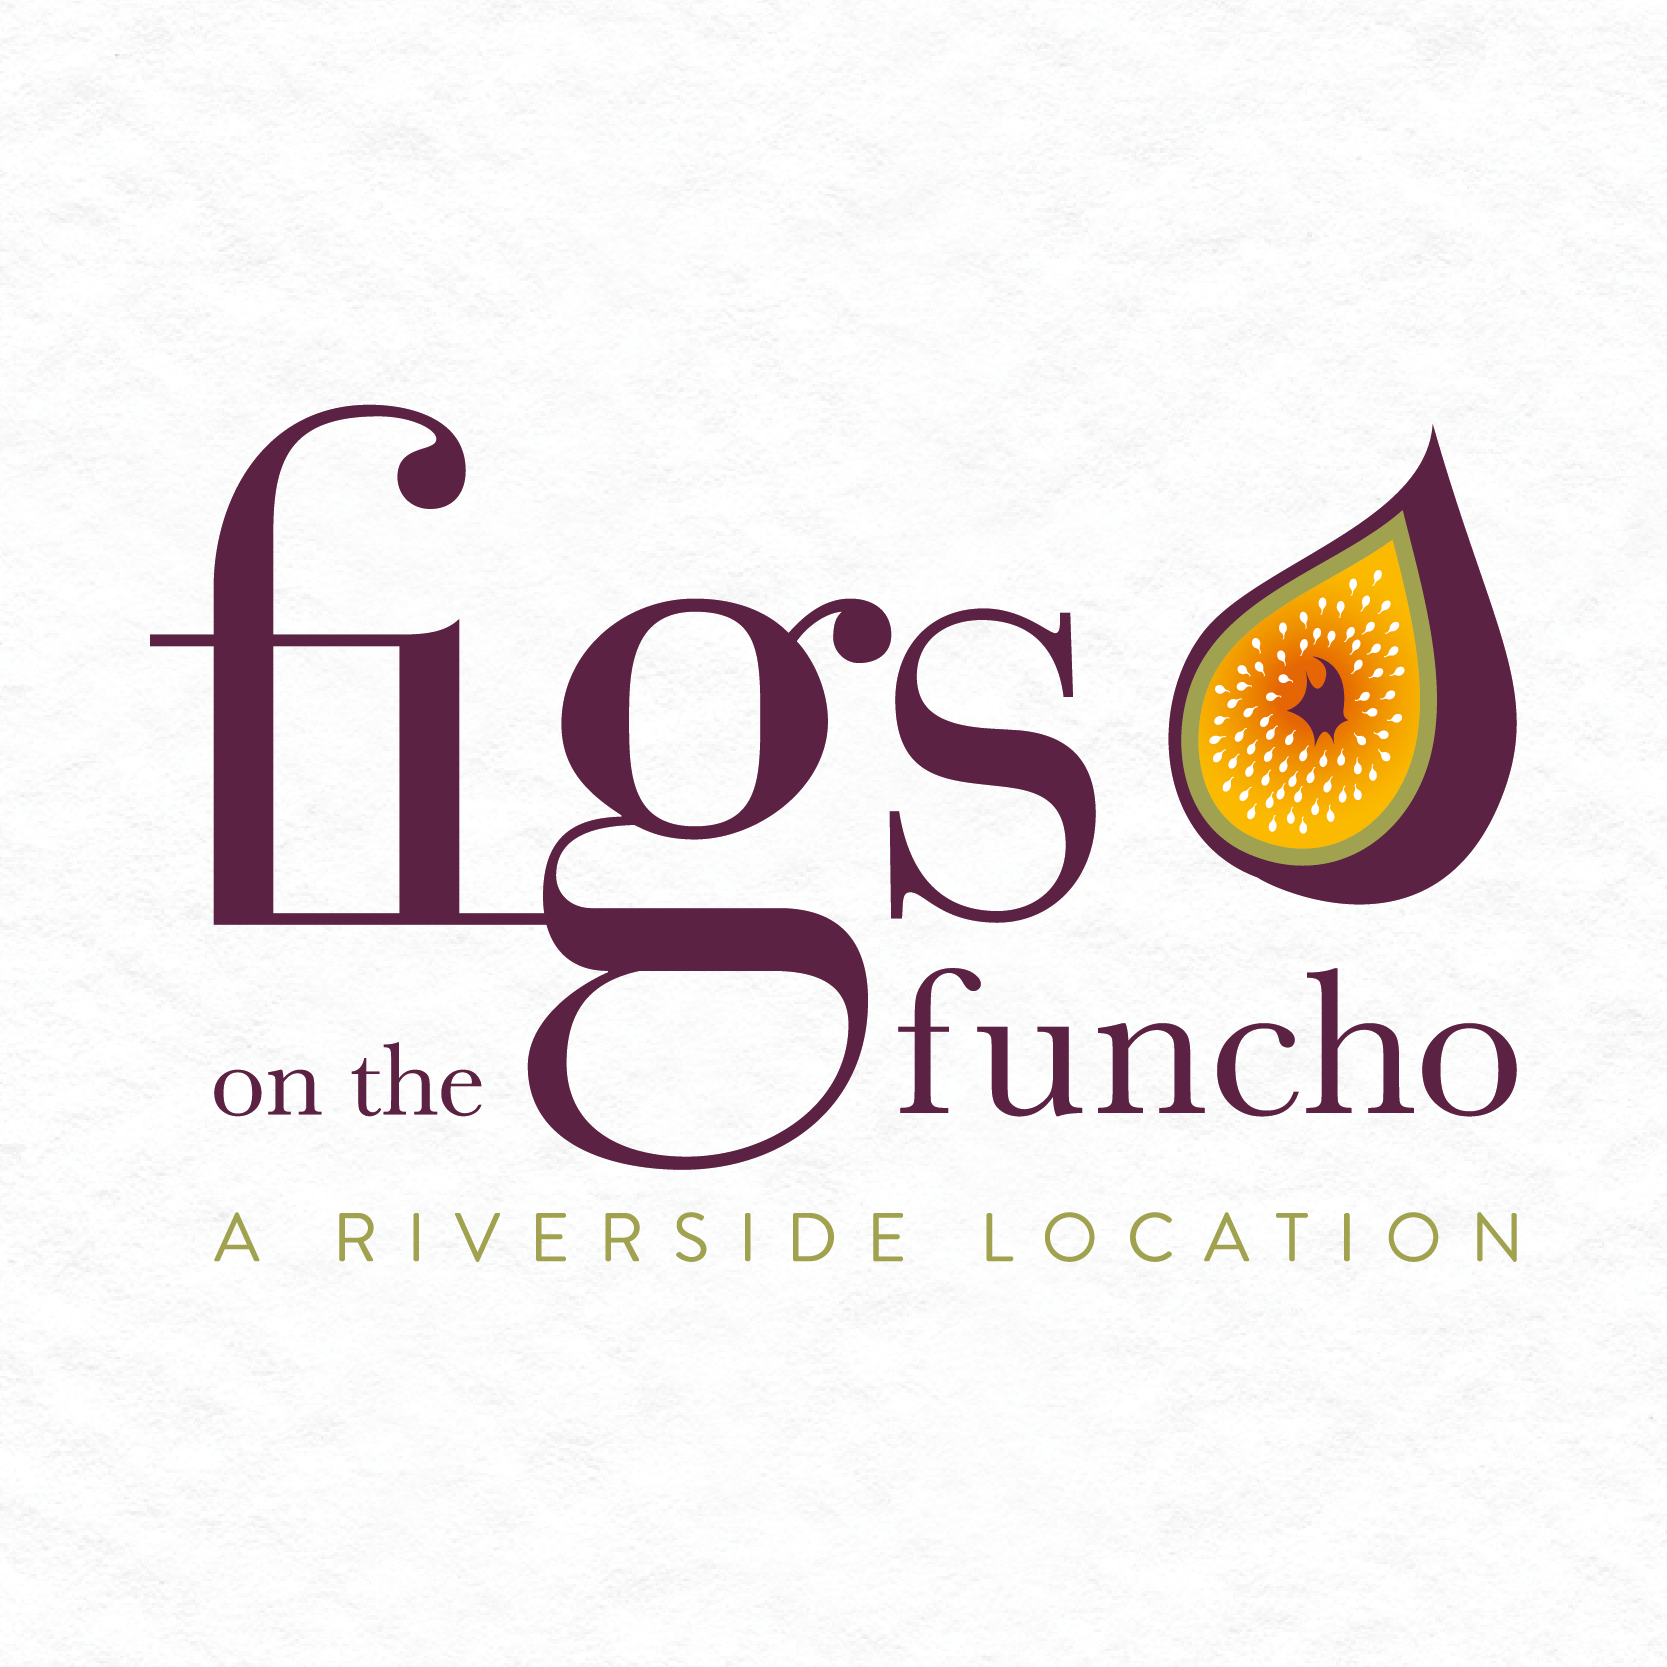 Figs on the Funcho